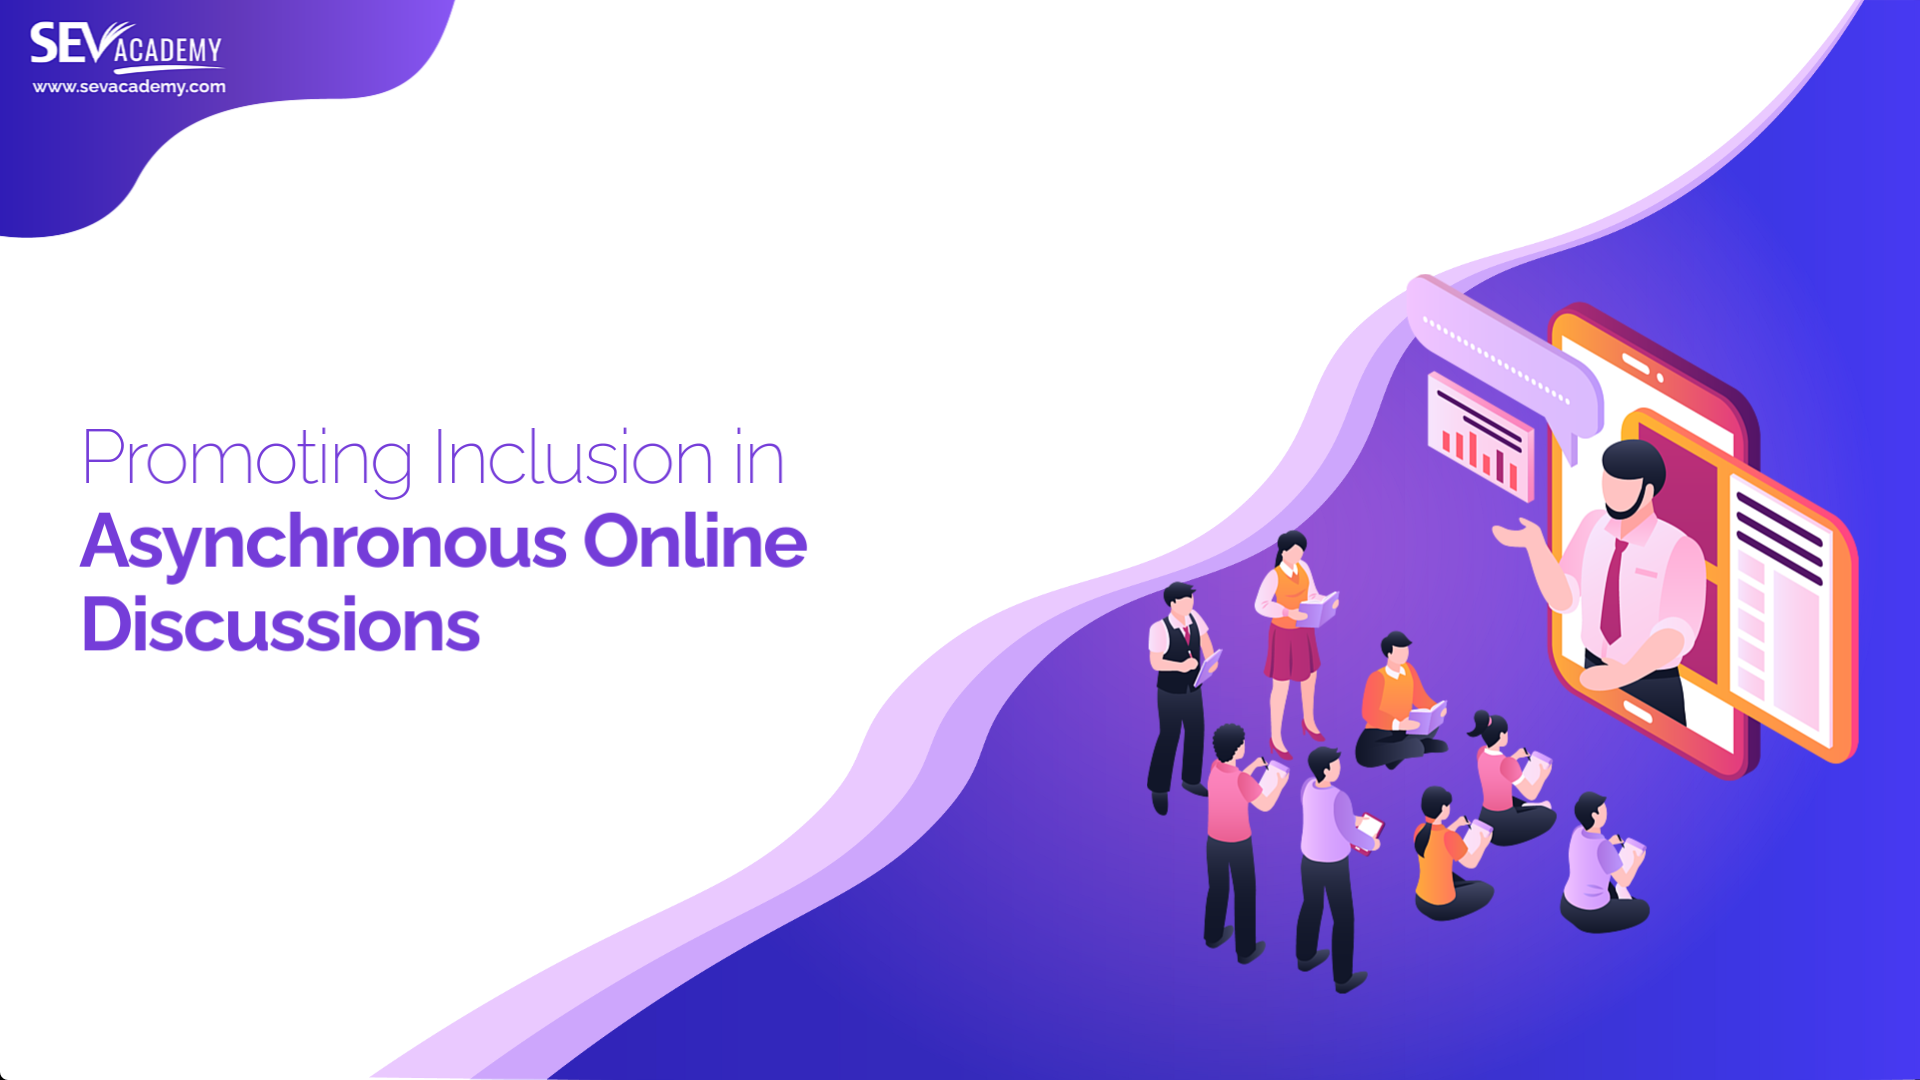 Promoting Inclusion in Asynchronous Online Discussions